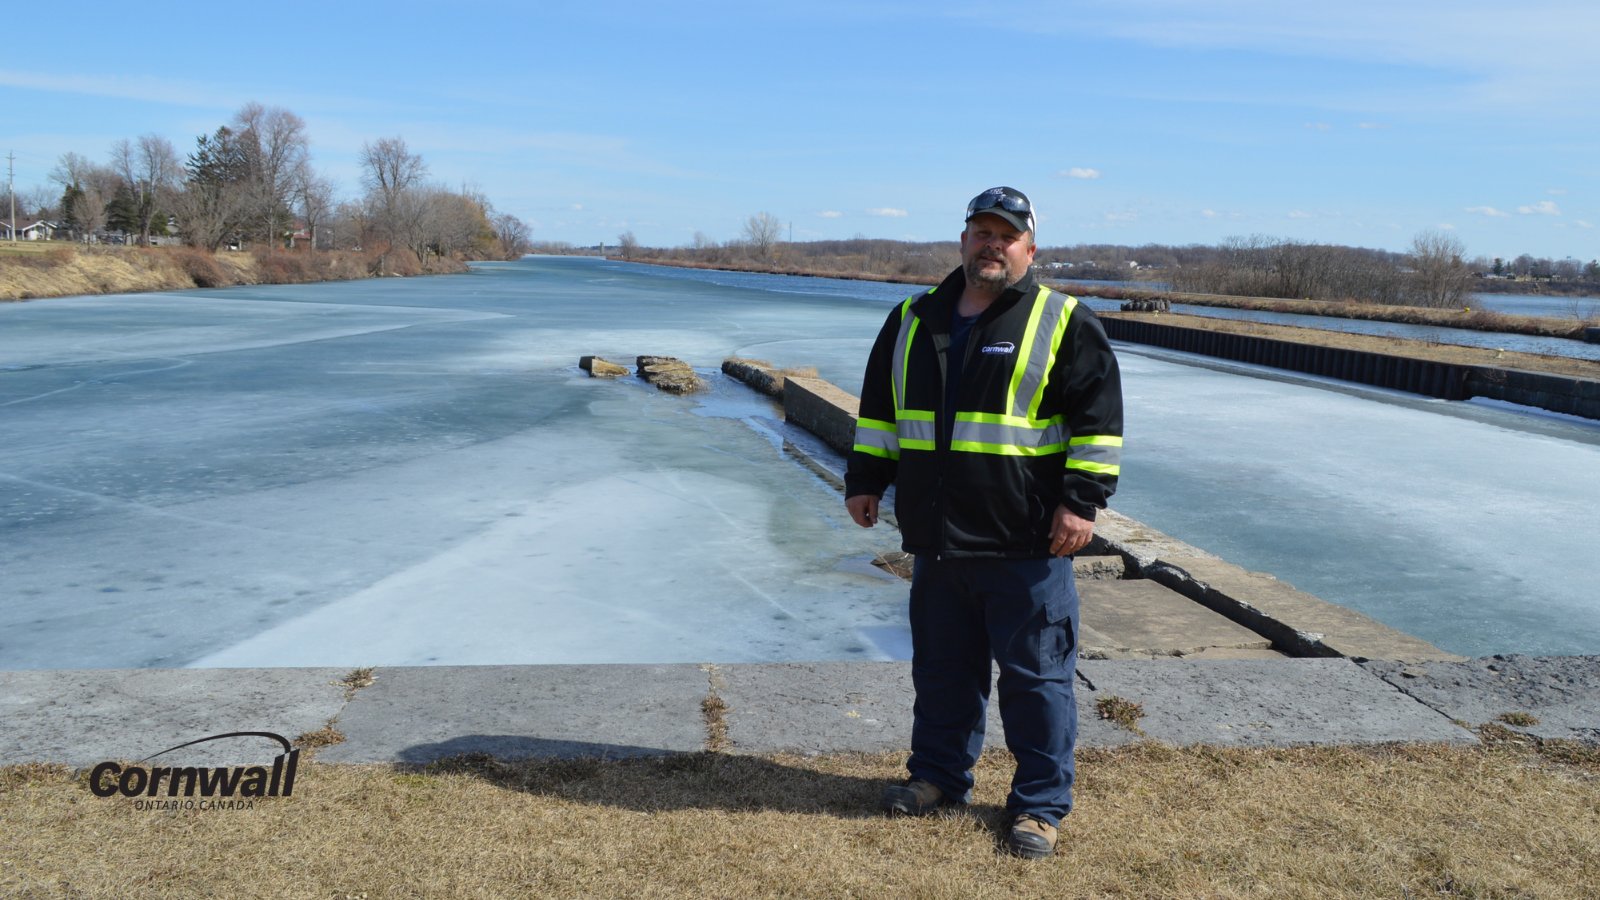 City of Cornwall employee assists in ice water rescue